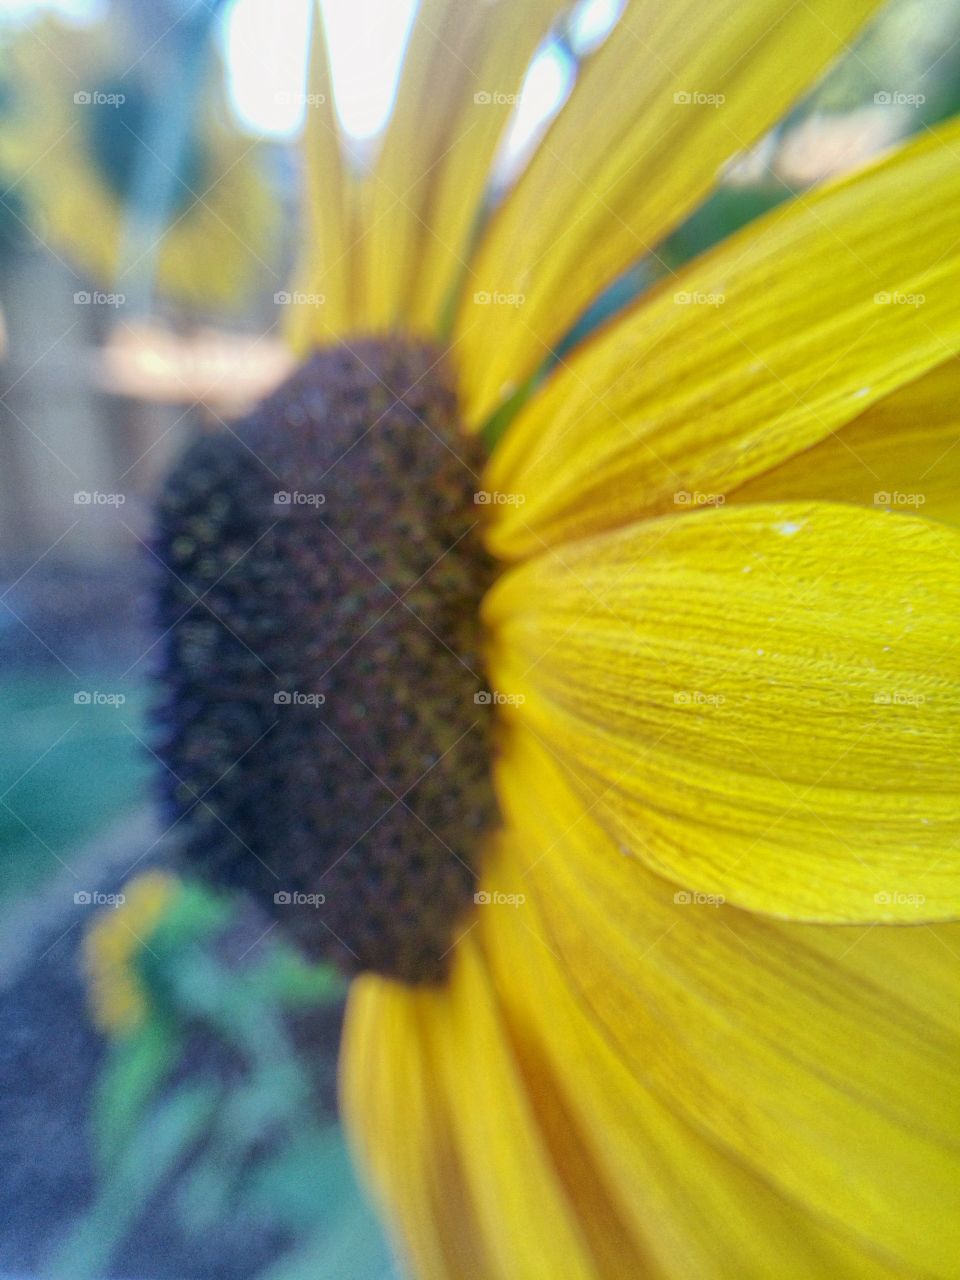 Sunflower side view